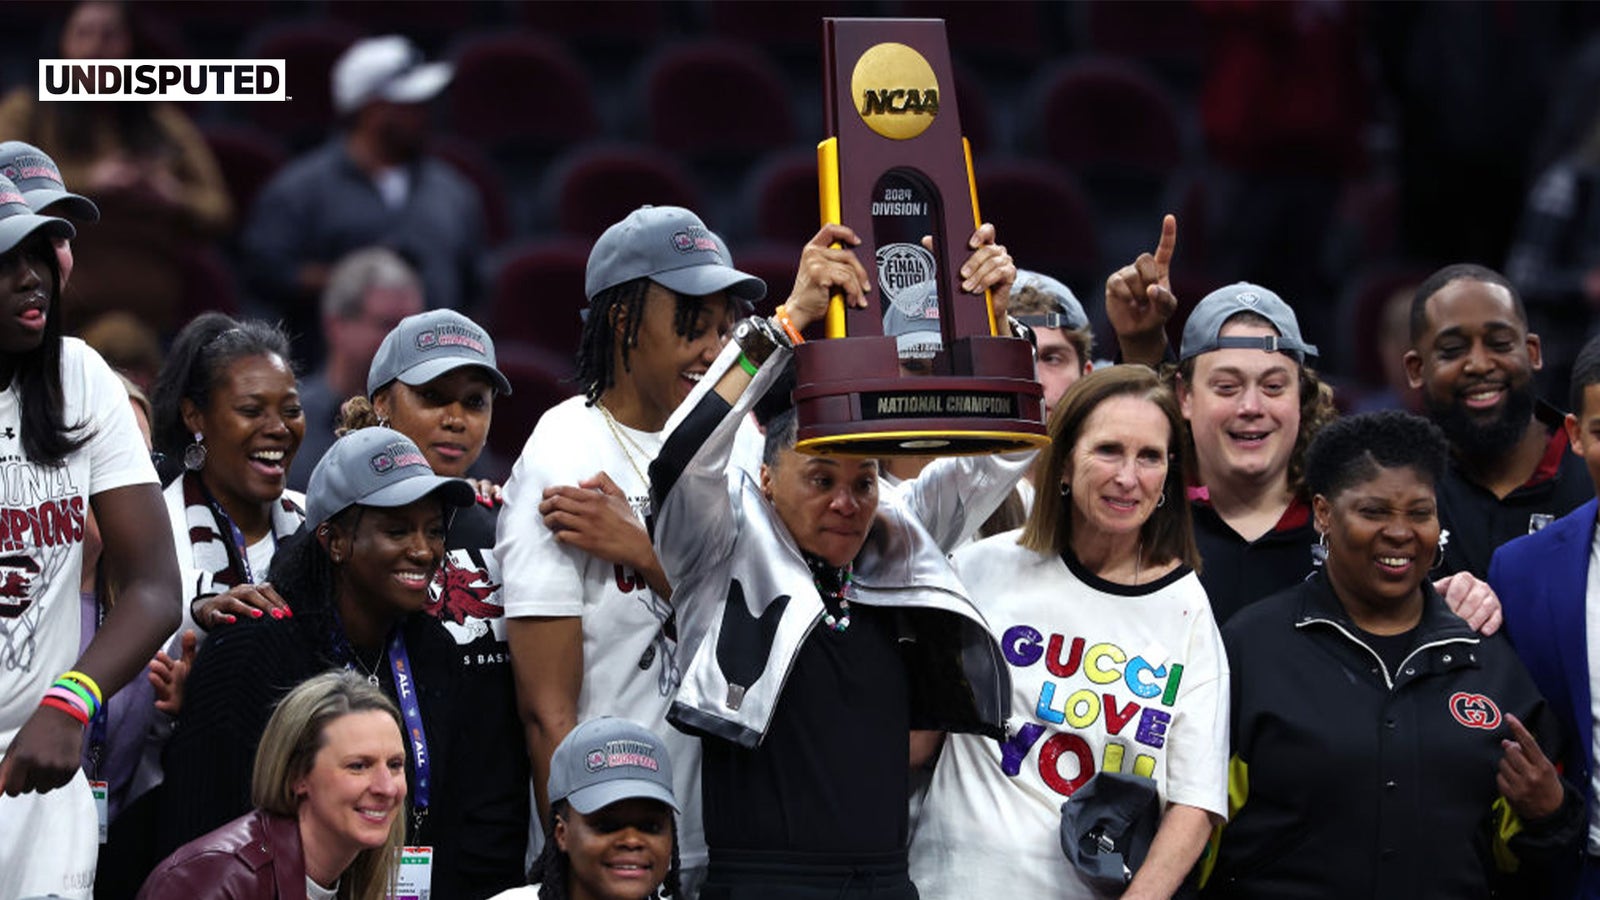 South Carolina completes undefeated season with title win over Iowa